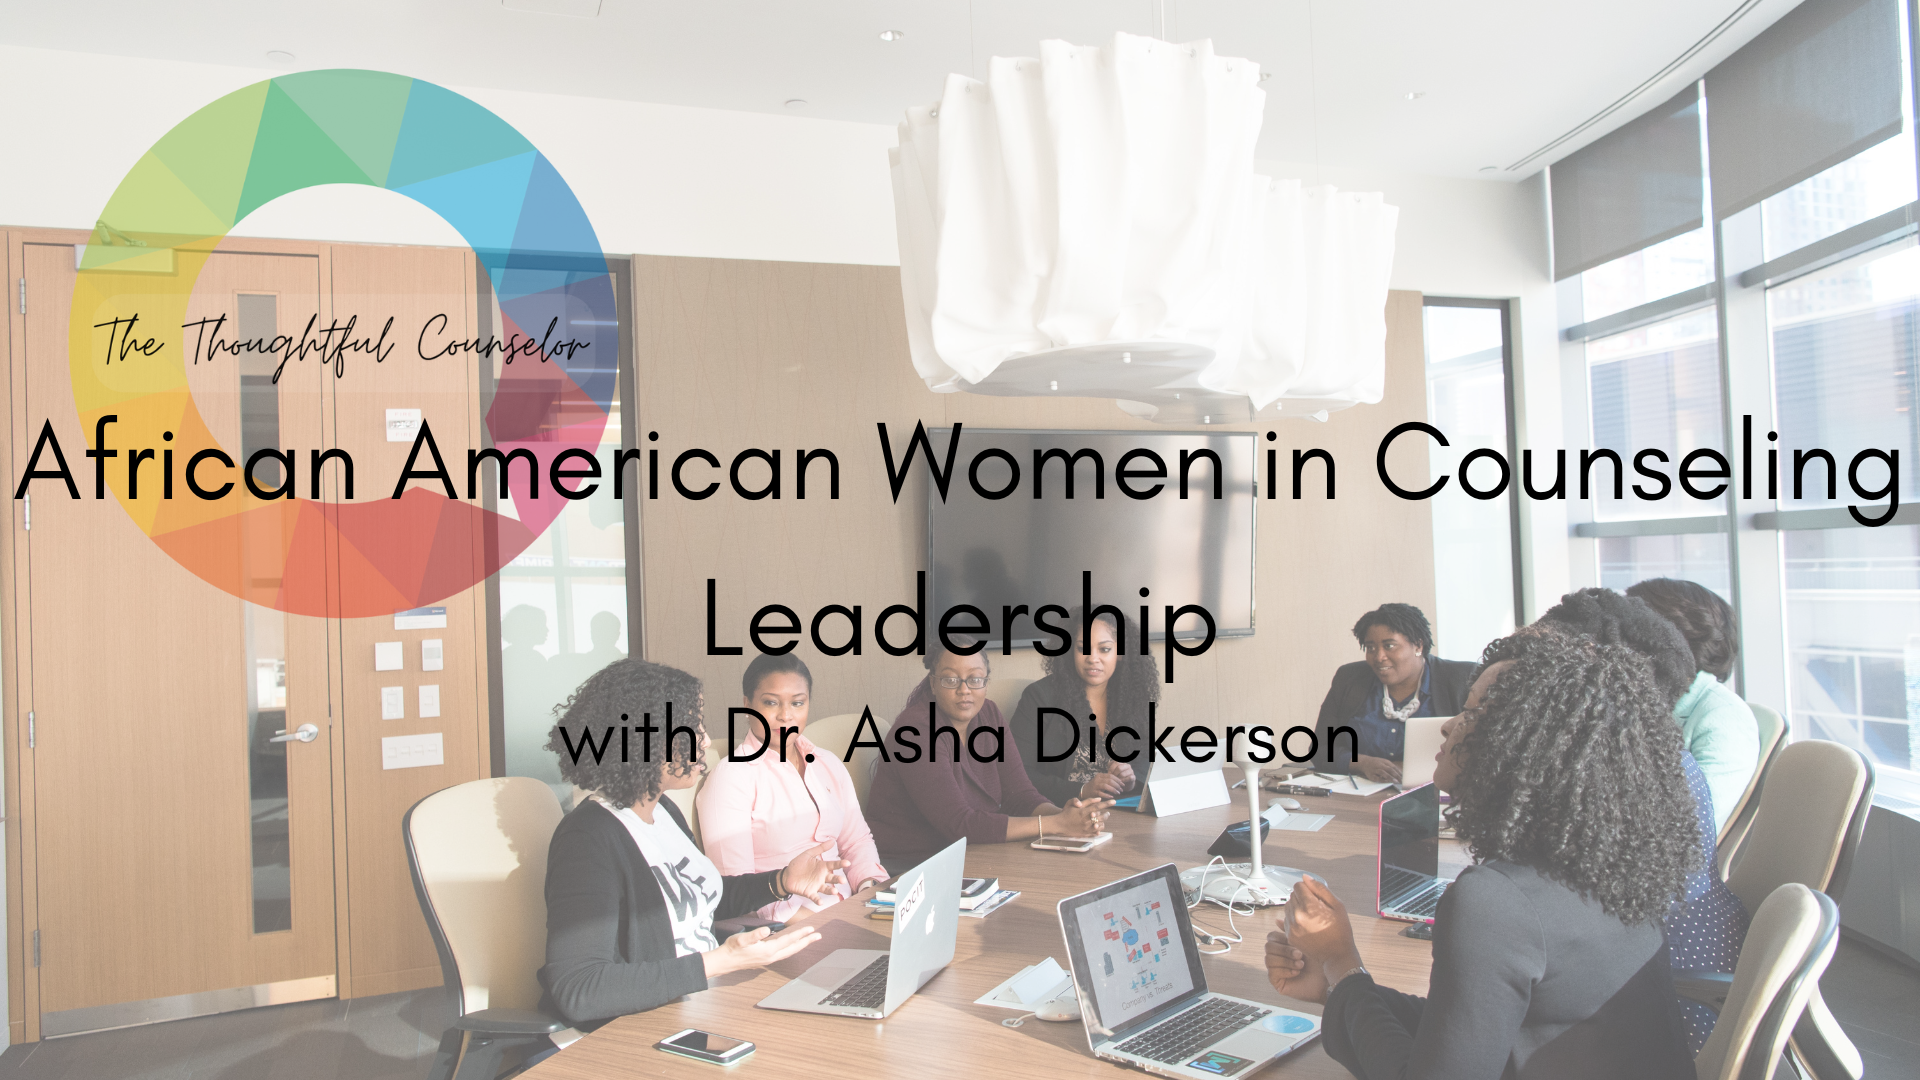 Lived Experiences of African American Women in Counseling Leadership